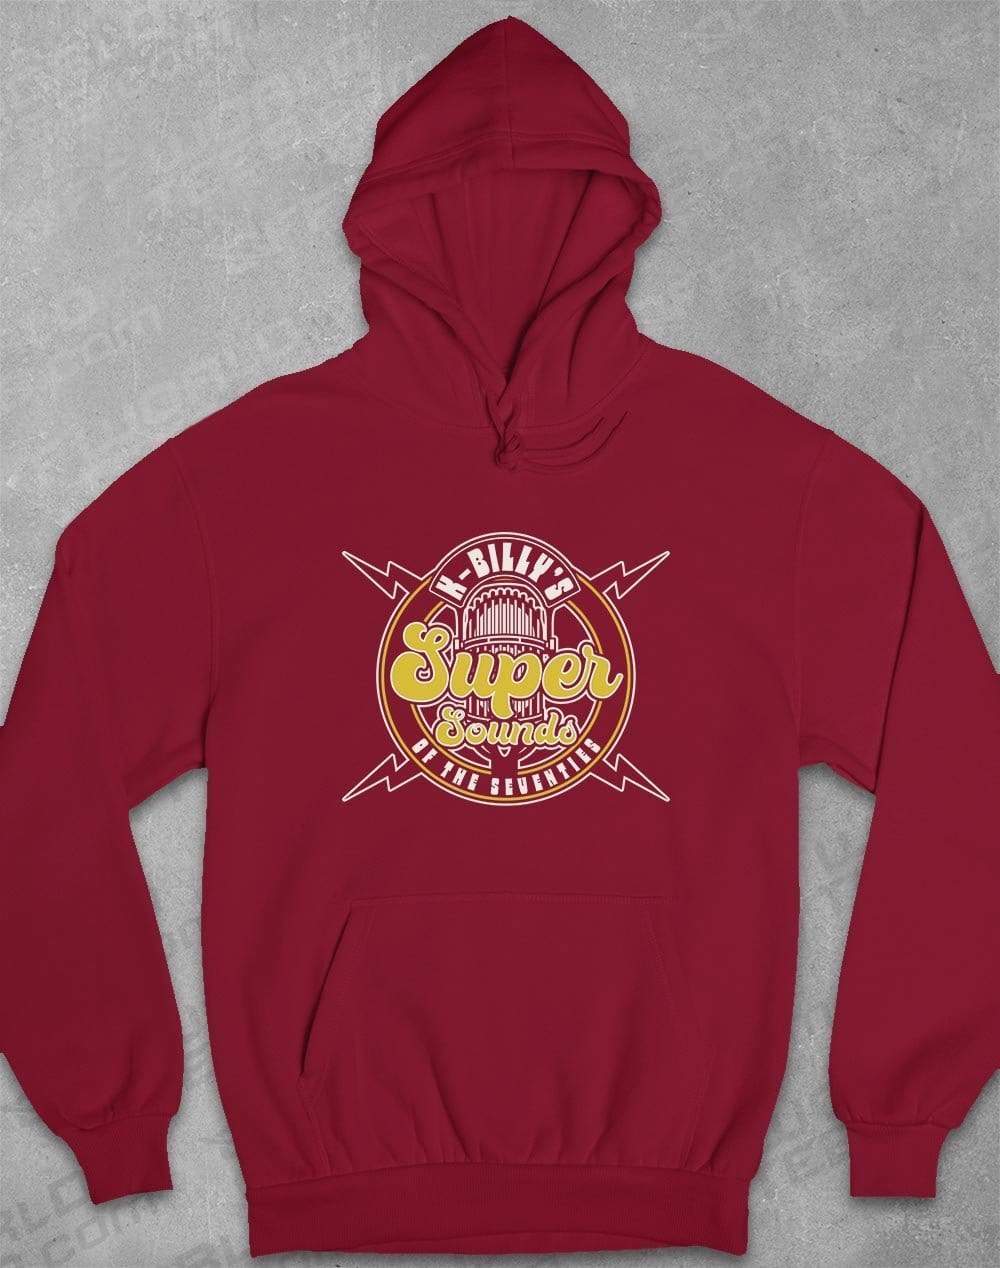 K-Billy's Super Sounds Hoodie S / Burgundy  - Off World Tees